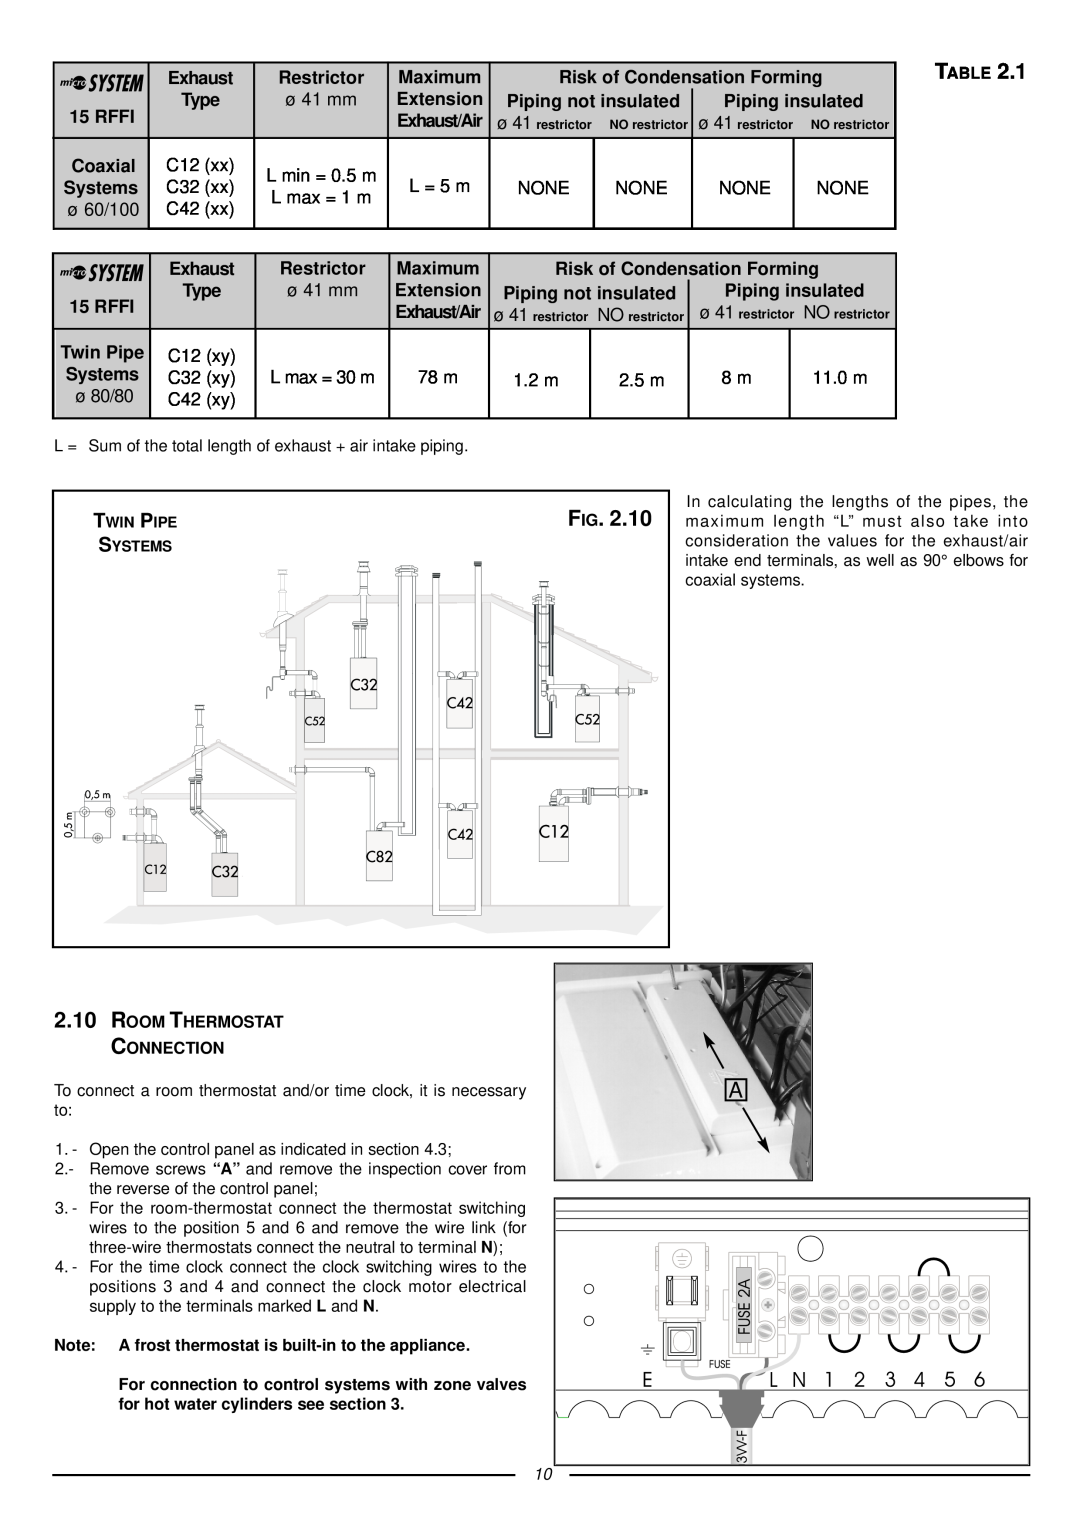 Ariston 41-116-05 installation instructions 2.10, Coaxial 